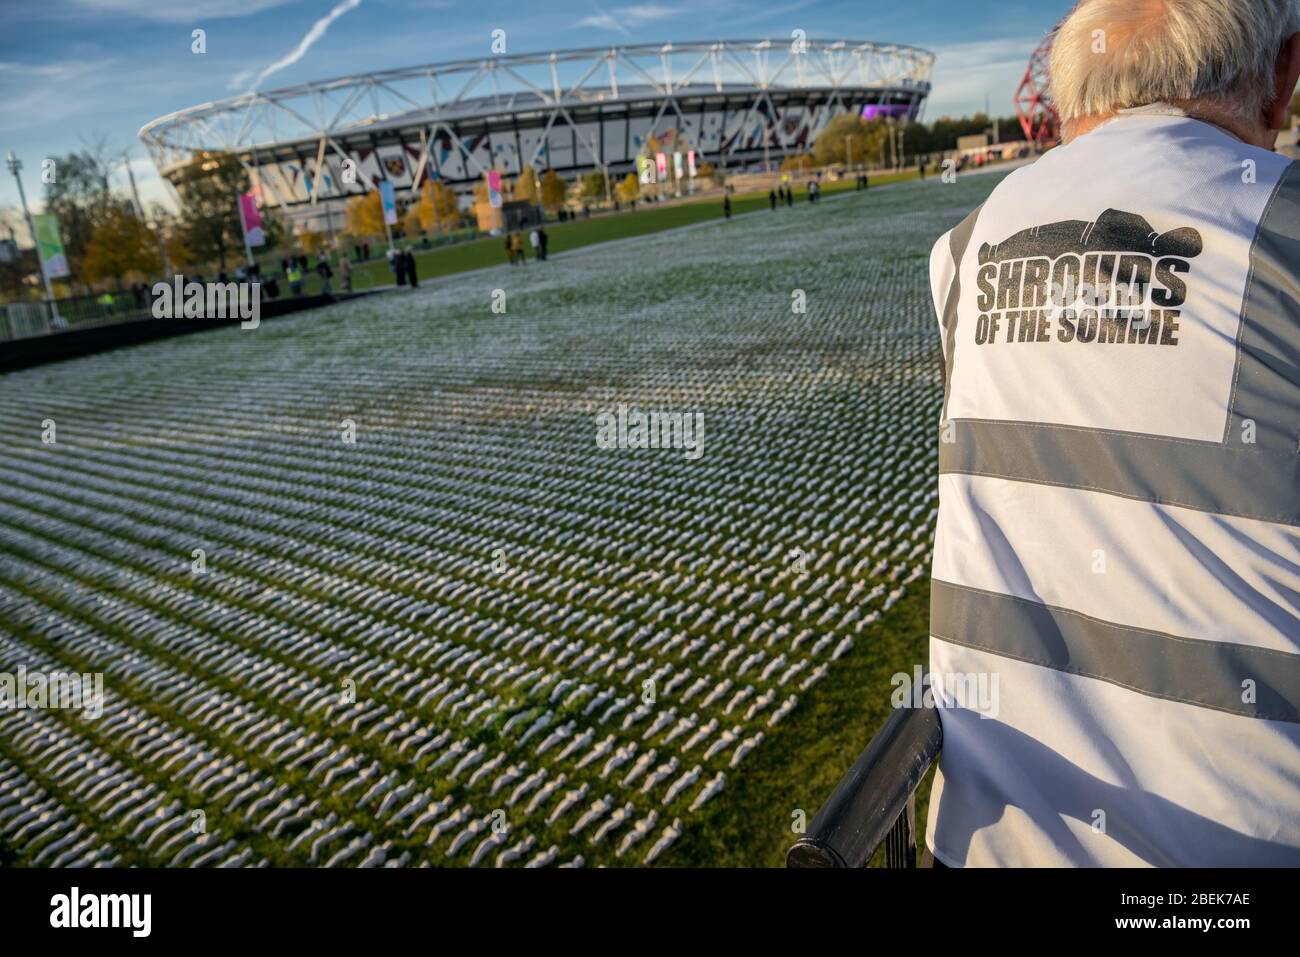 Shrouds of the Somme, The Olympic Park.  Created by artist Rob Heard Stock Photo